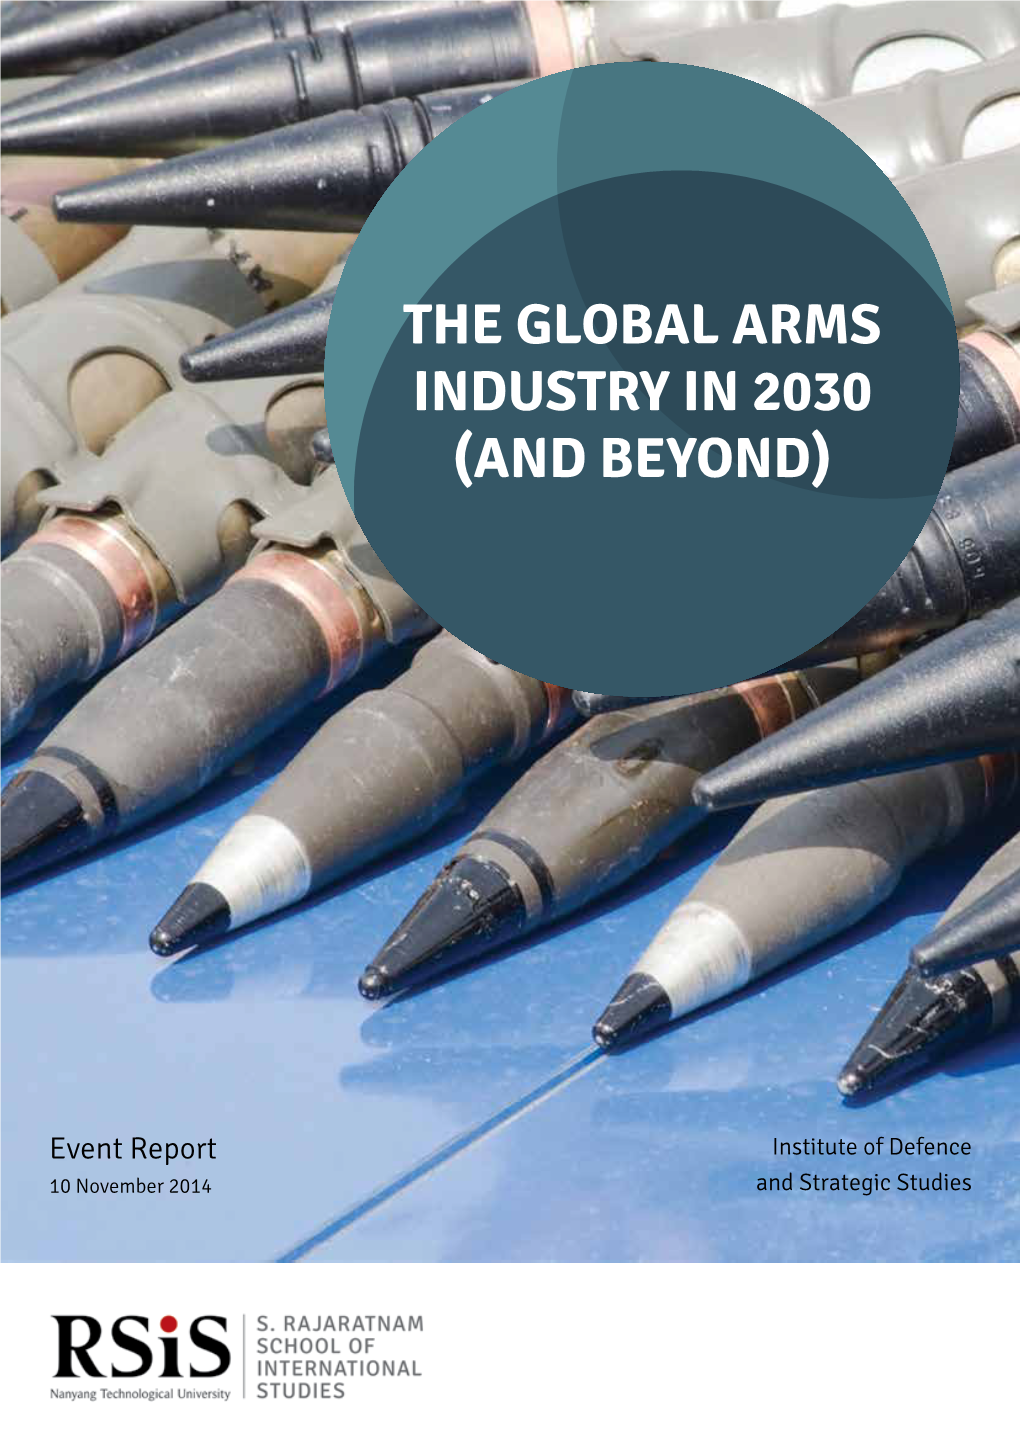 The Global Arms Industry in 2030 (And Beyond)